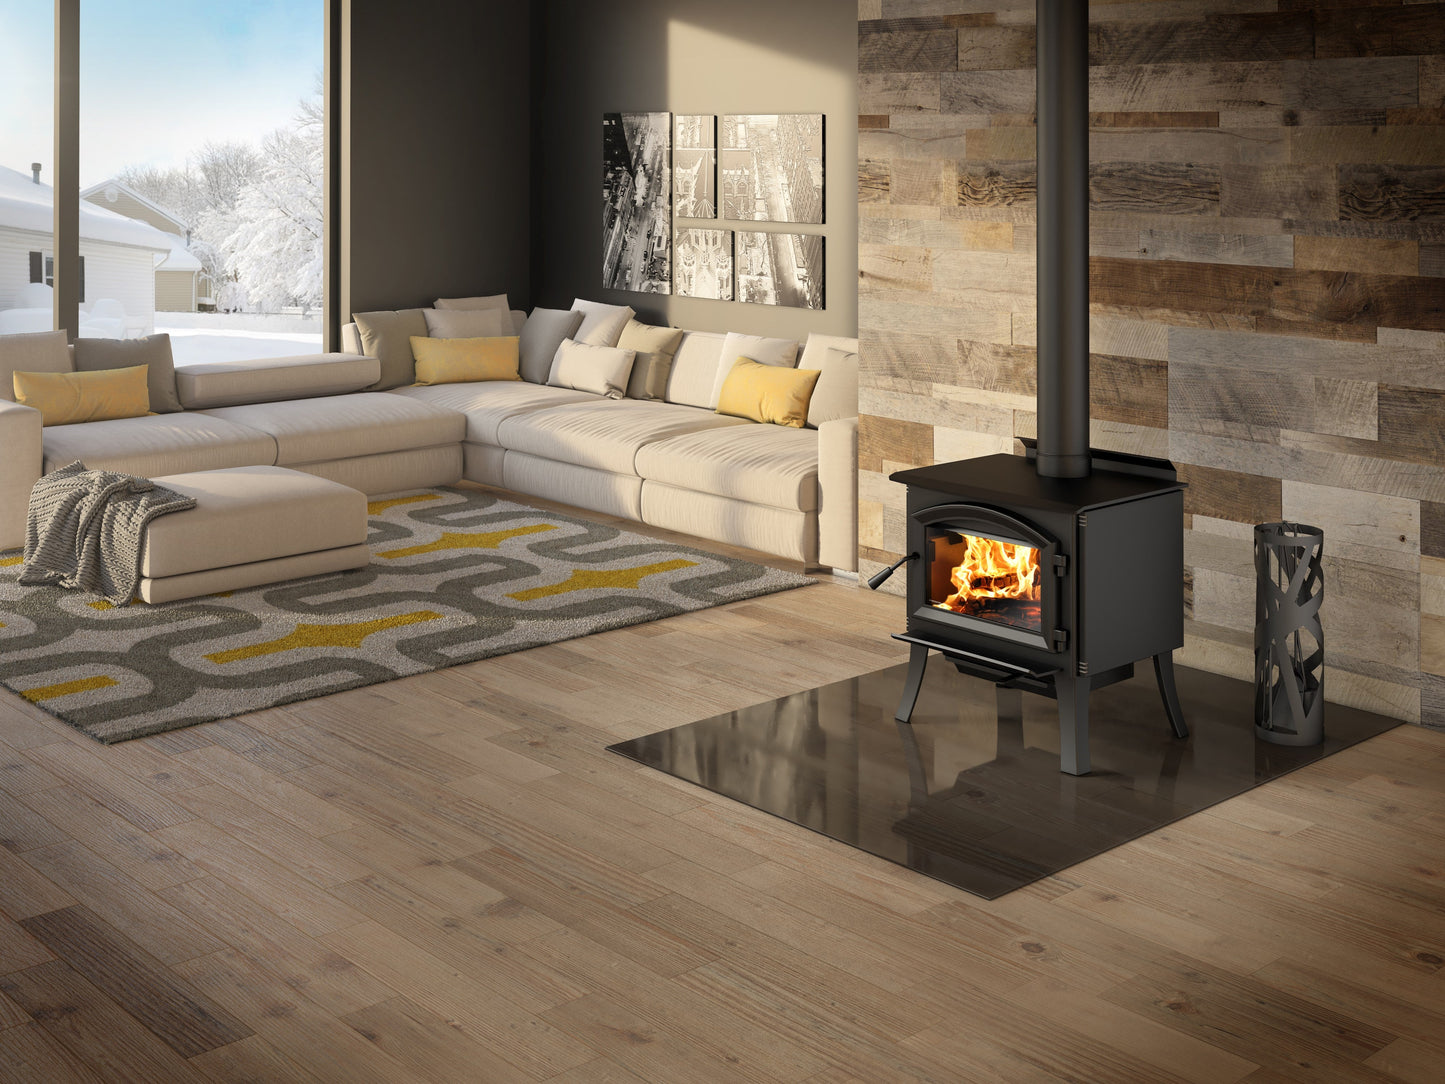 Enerzone Solution 2.3 Wood Burning Stove With Black Cast Iron Flared Legs & Ash Drawer